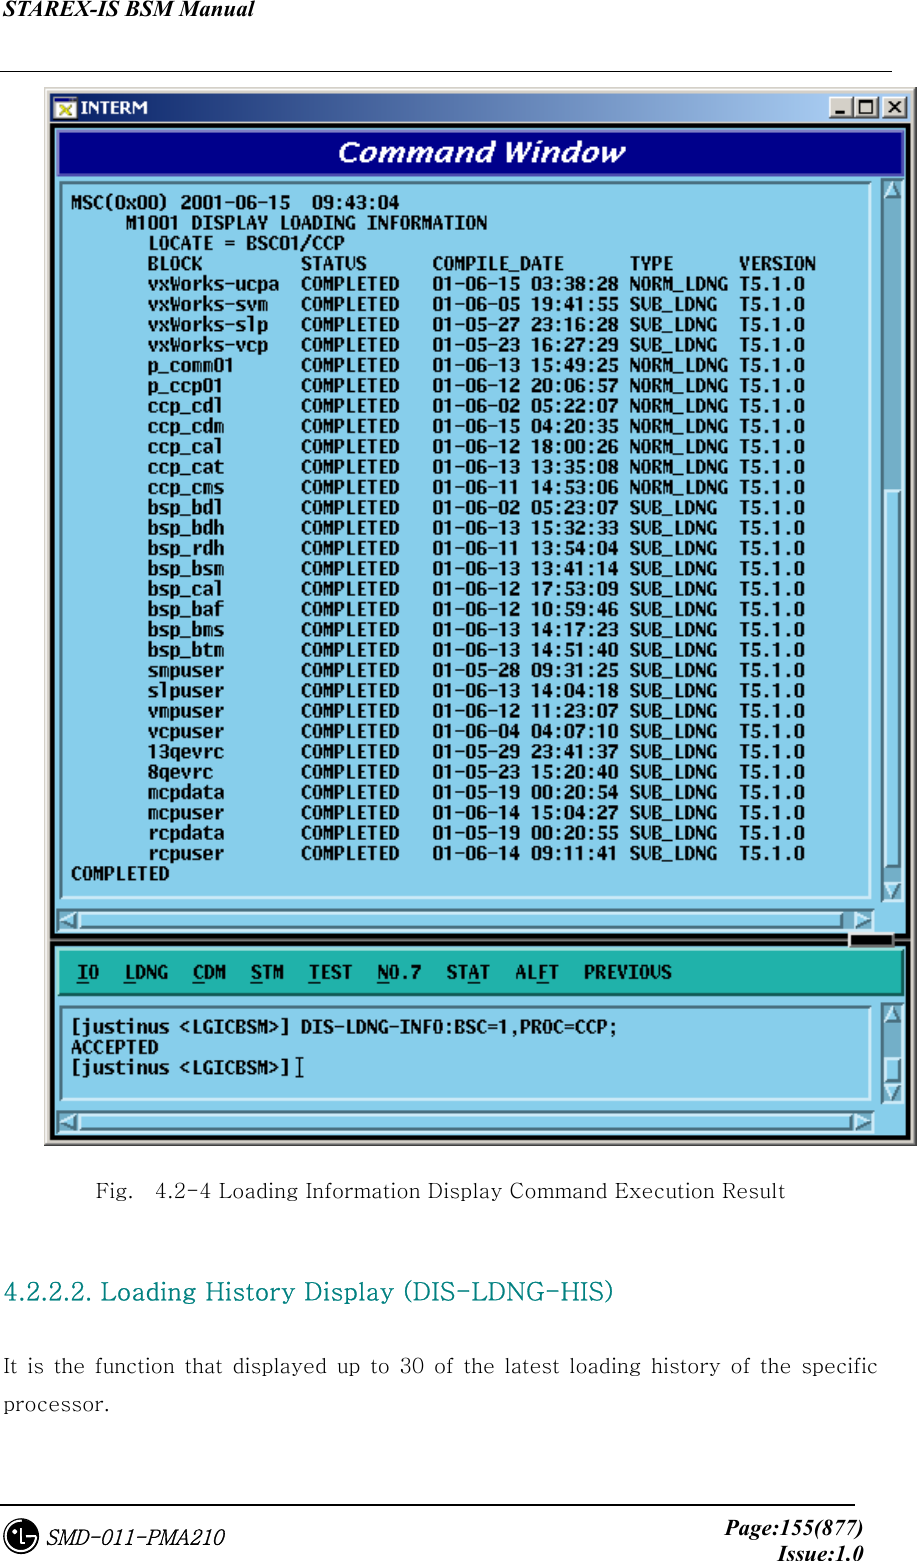 STAREX-IS BSM Manual     Page:155(877)Issue:1.0SMD-011-PMA210  Fig.    4.2-4 Loading Information Display Command Execution Result  4.2.2.2. Loading History Display (DIS-LDNG-HIS)  It  is  the  function  that  displayed  up  to  30  of  the  latest  loading  history  of  the  specific processor.  